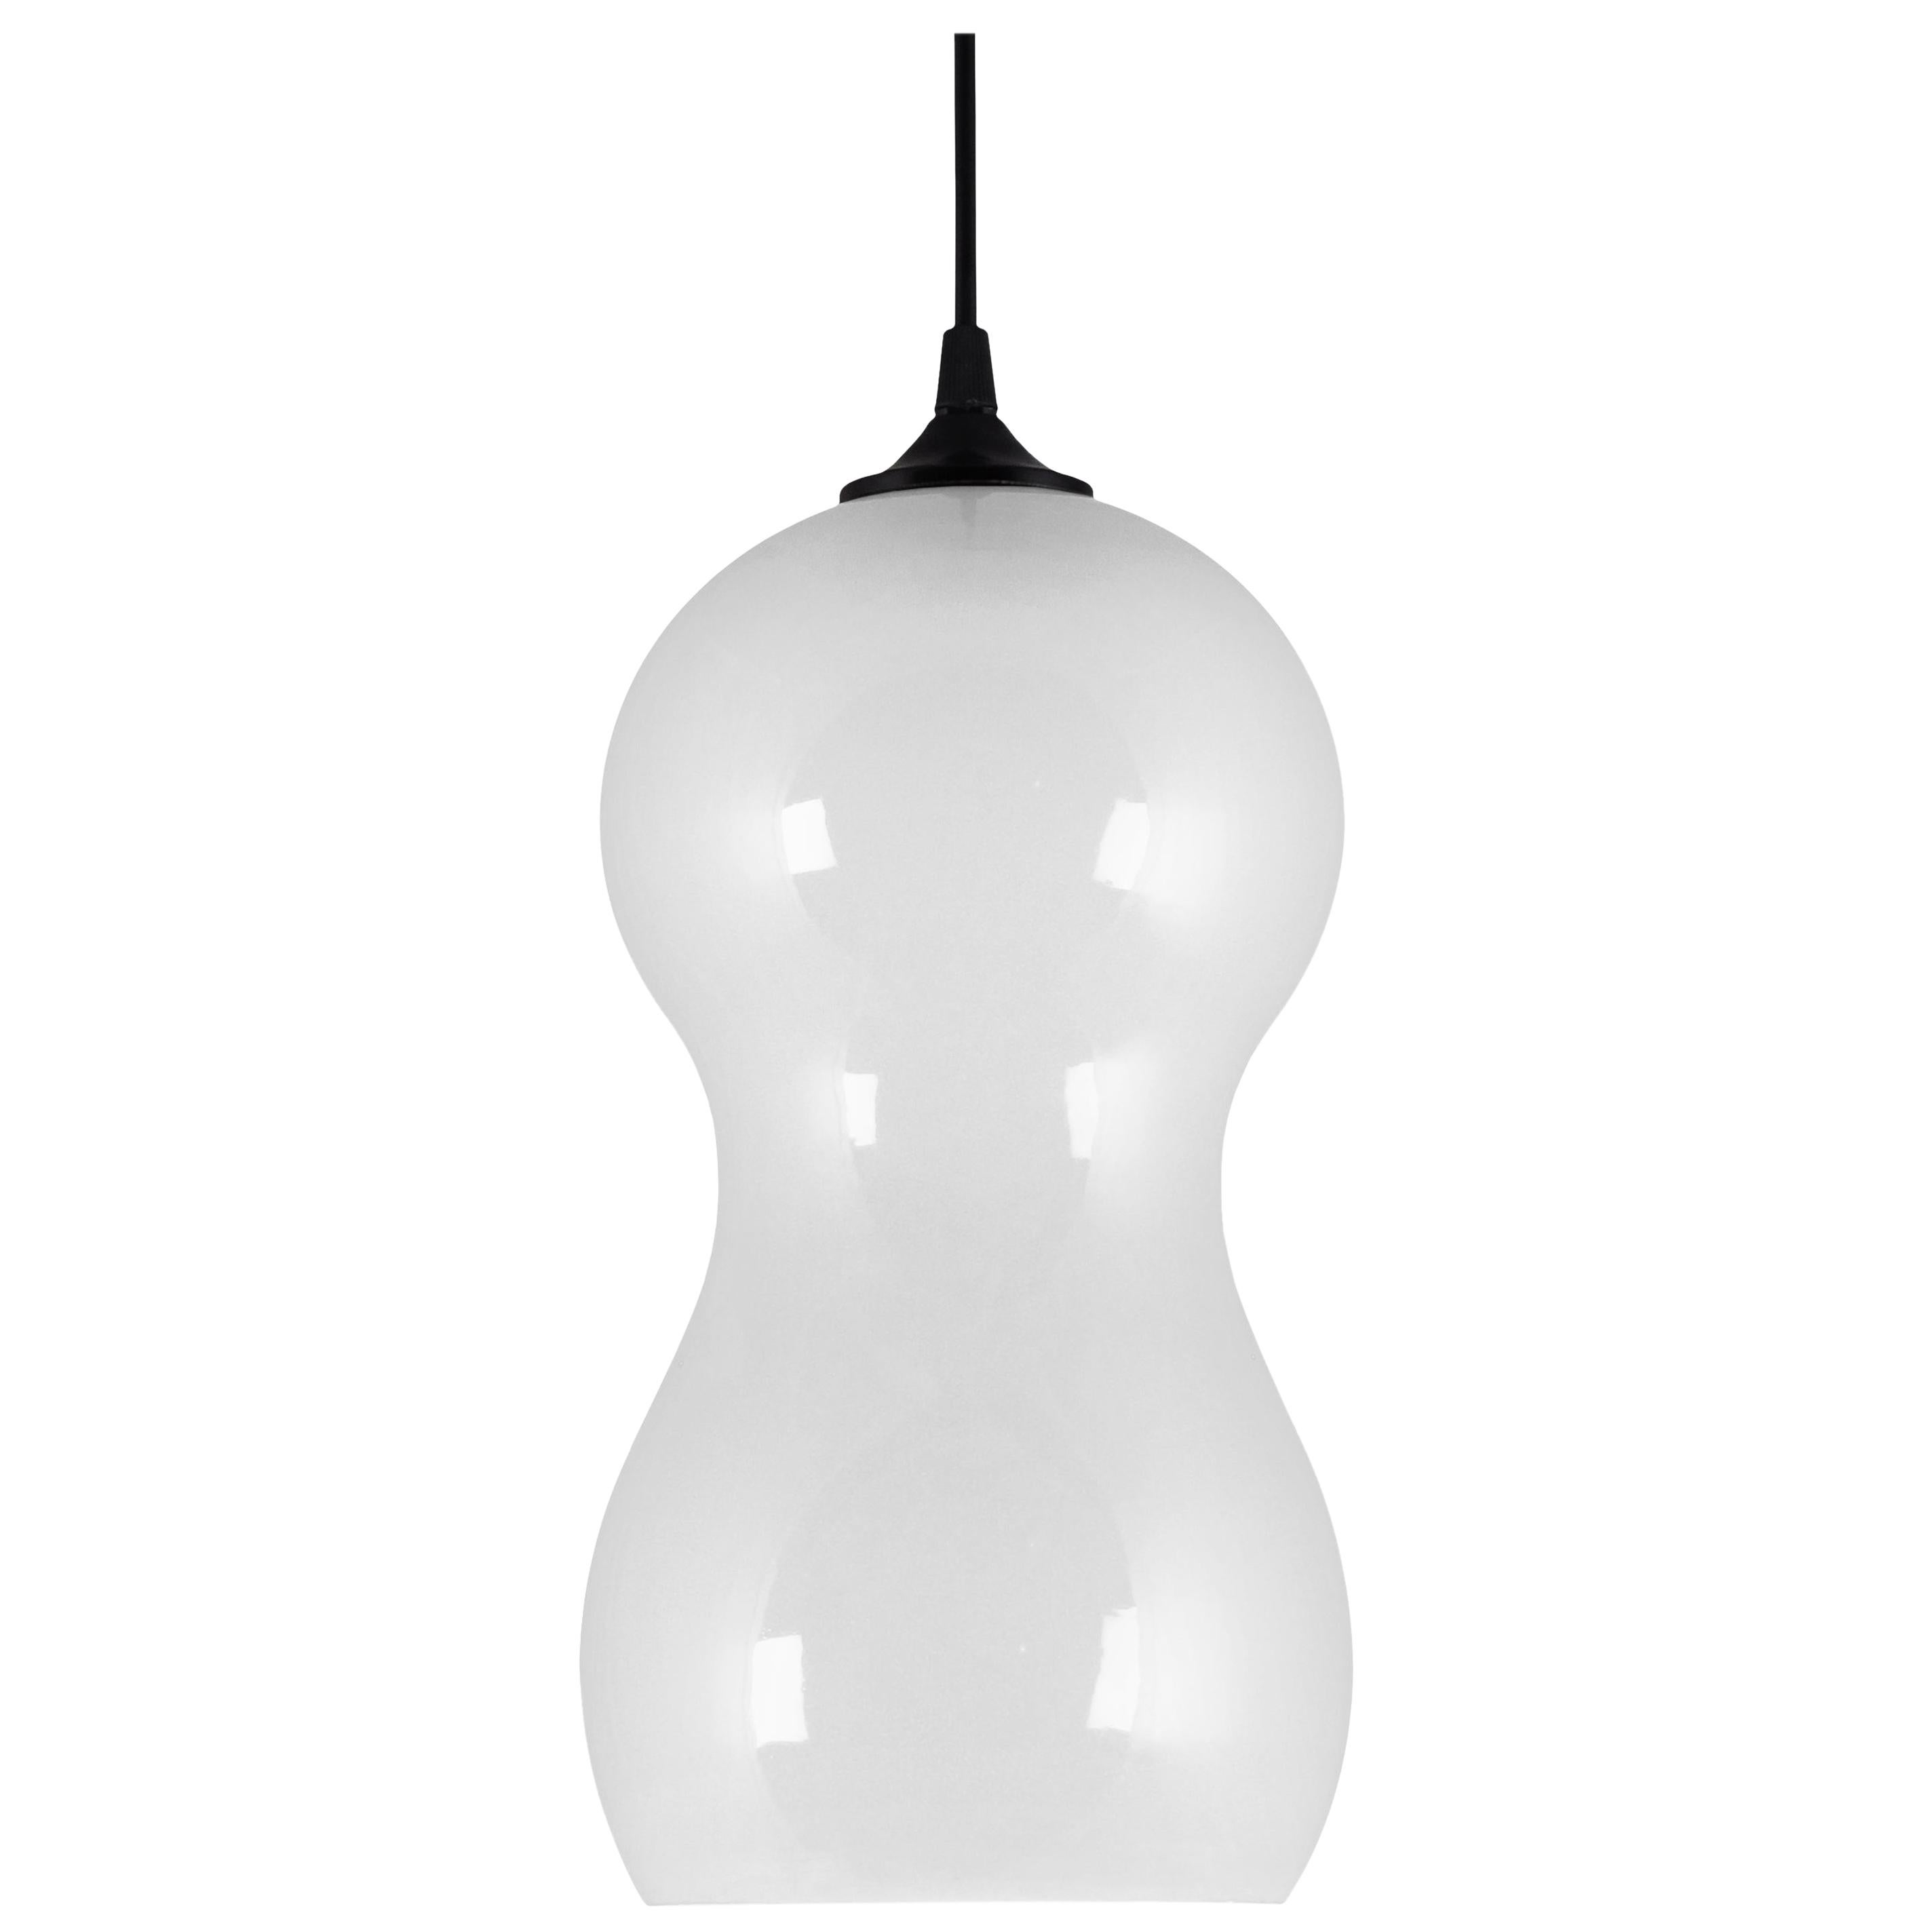 Contemporary Ceramic Pendant Lamp in Silky White Glaze - Cacahuate For Sale